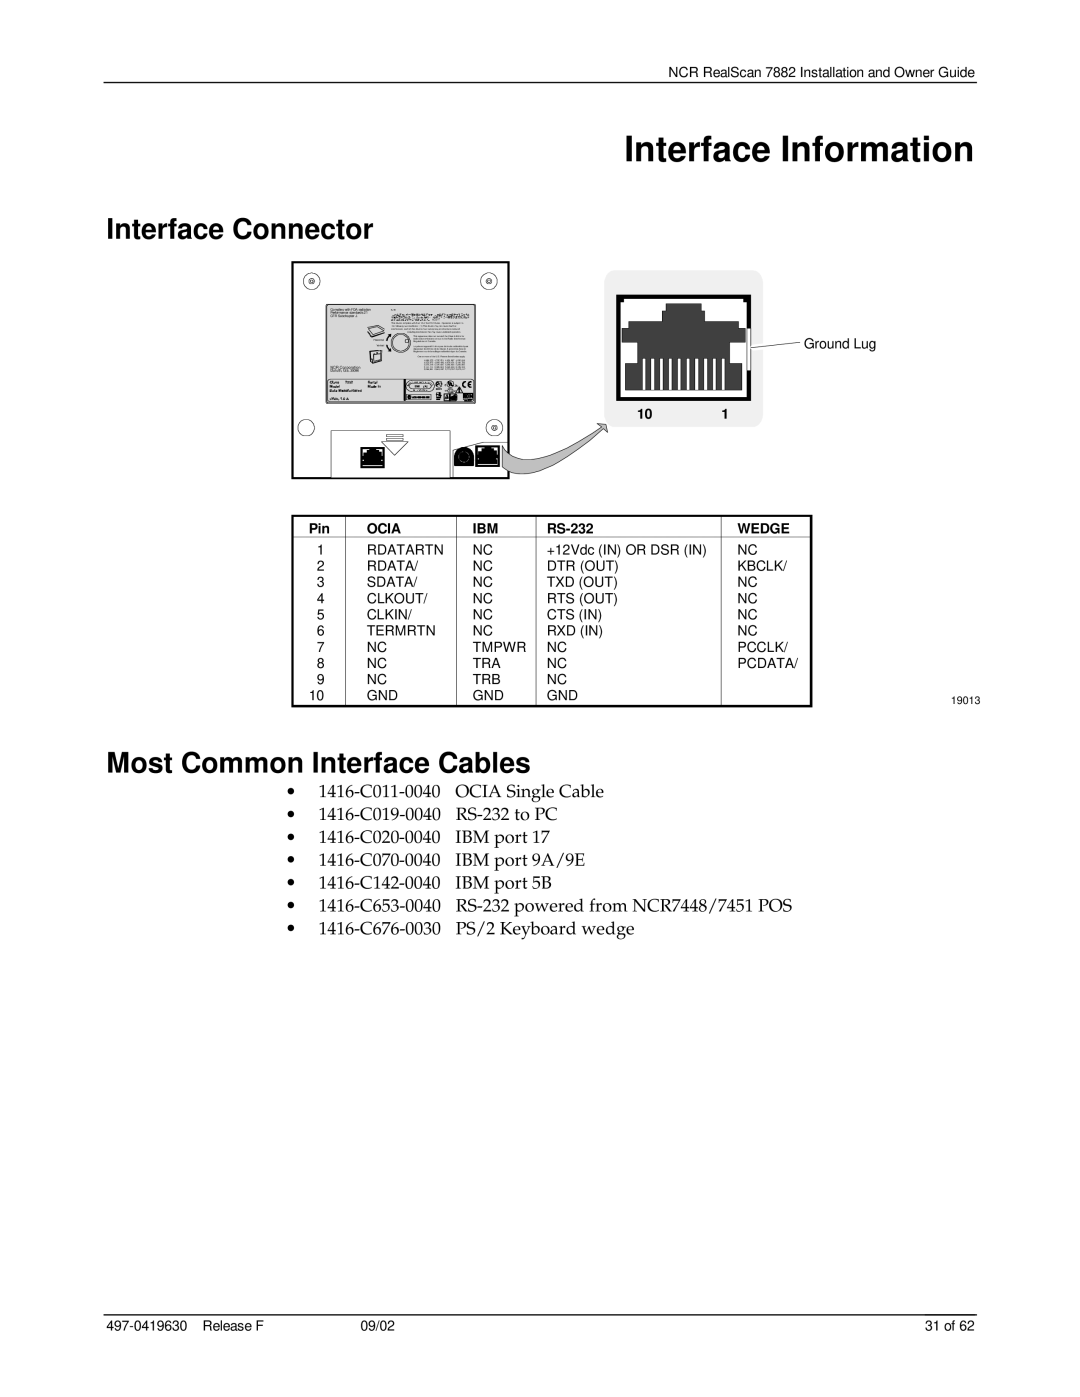 NCR 7882 manual Interface Information, Interface Connector, Most Common Interface Cables 